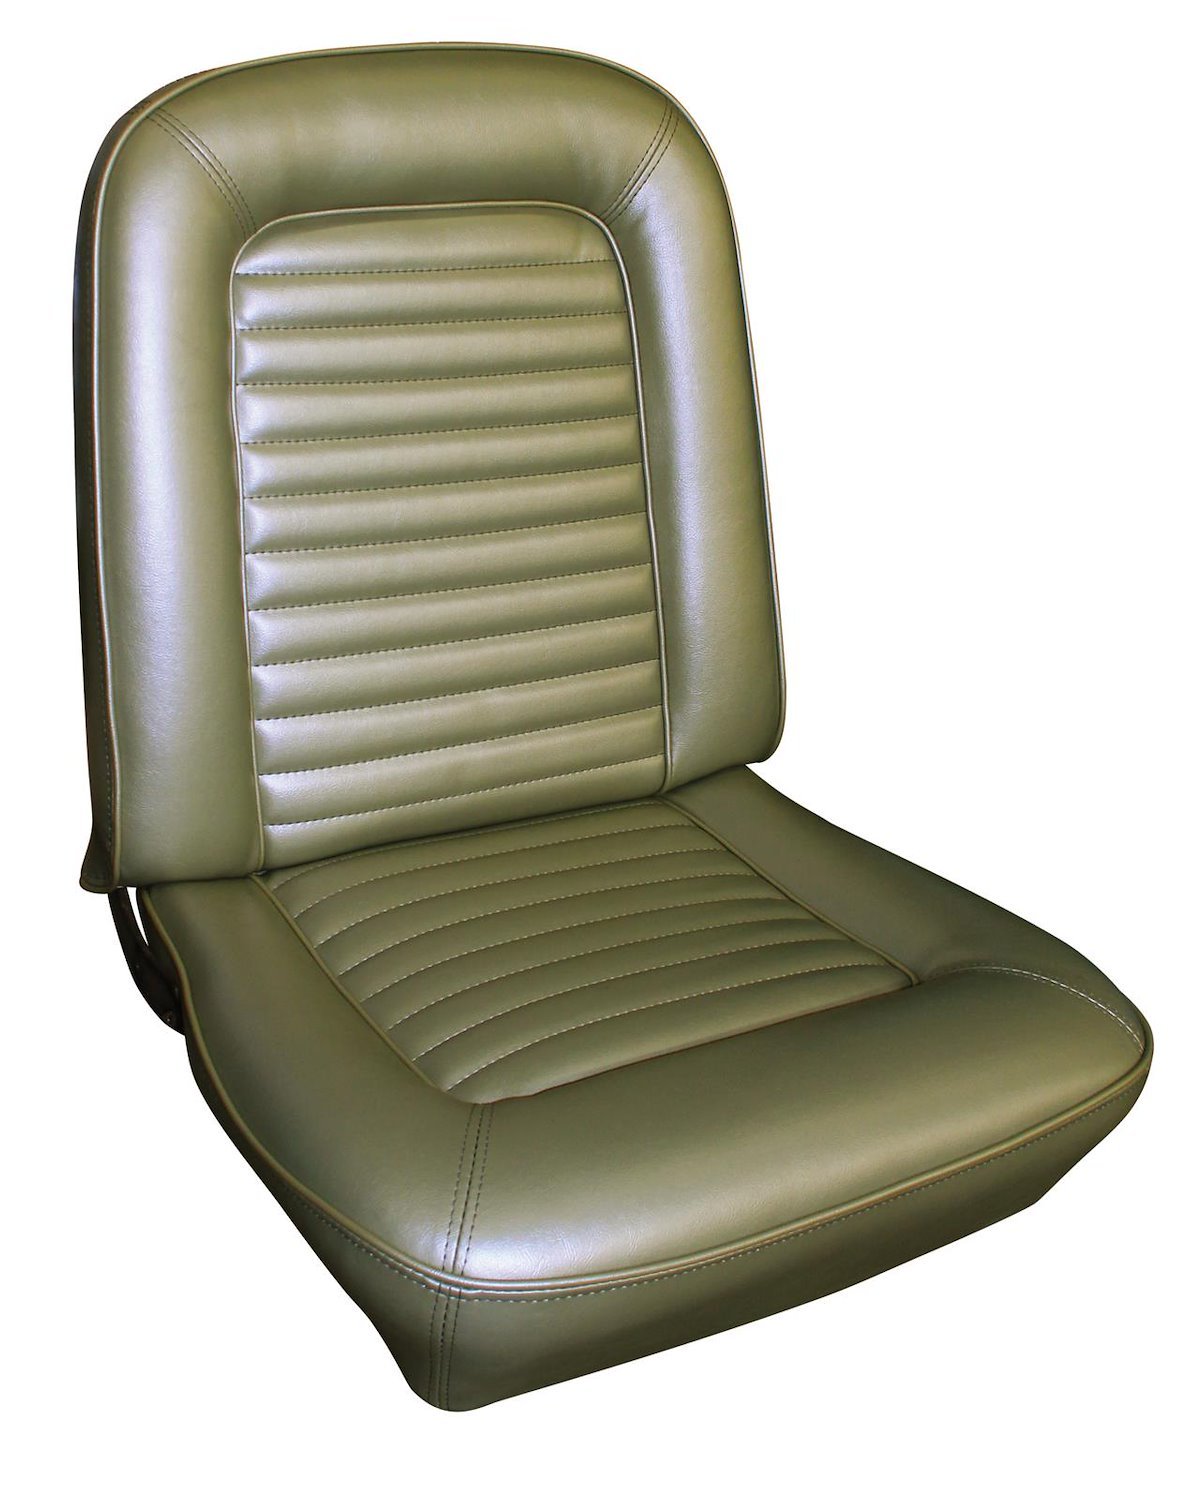 1971-1973 Ford Mustang Mach 1 Interior Front Bucket Seats